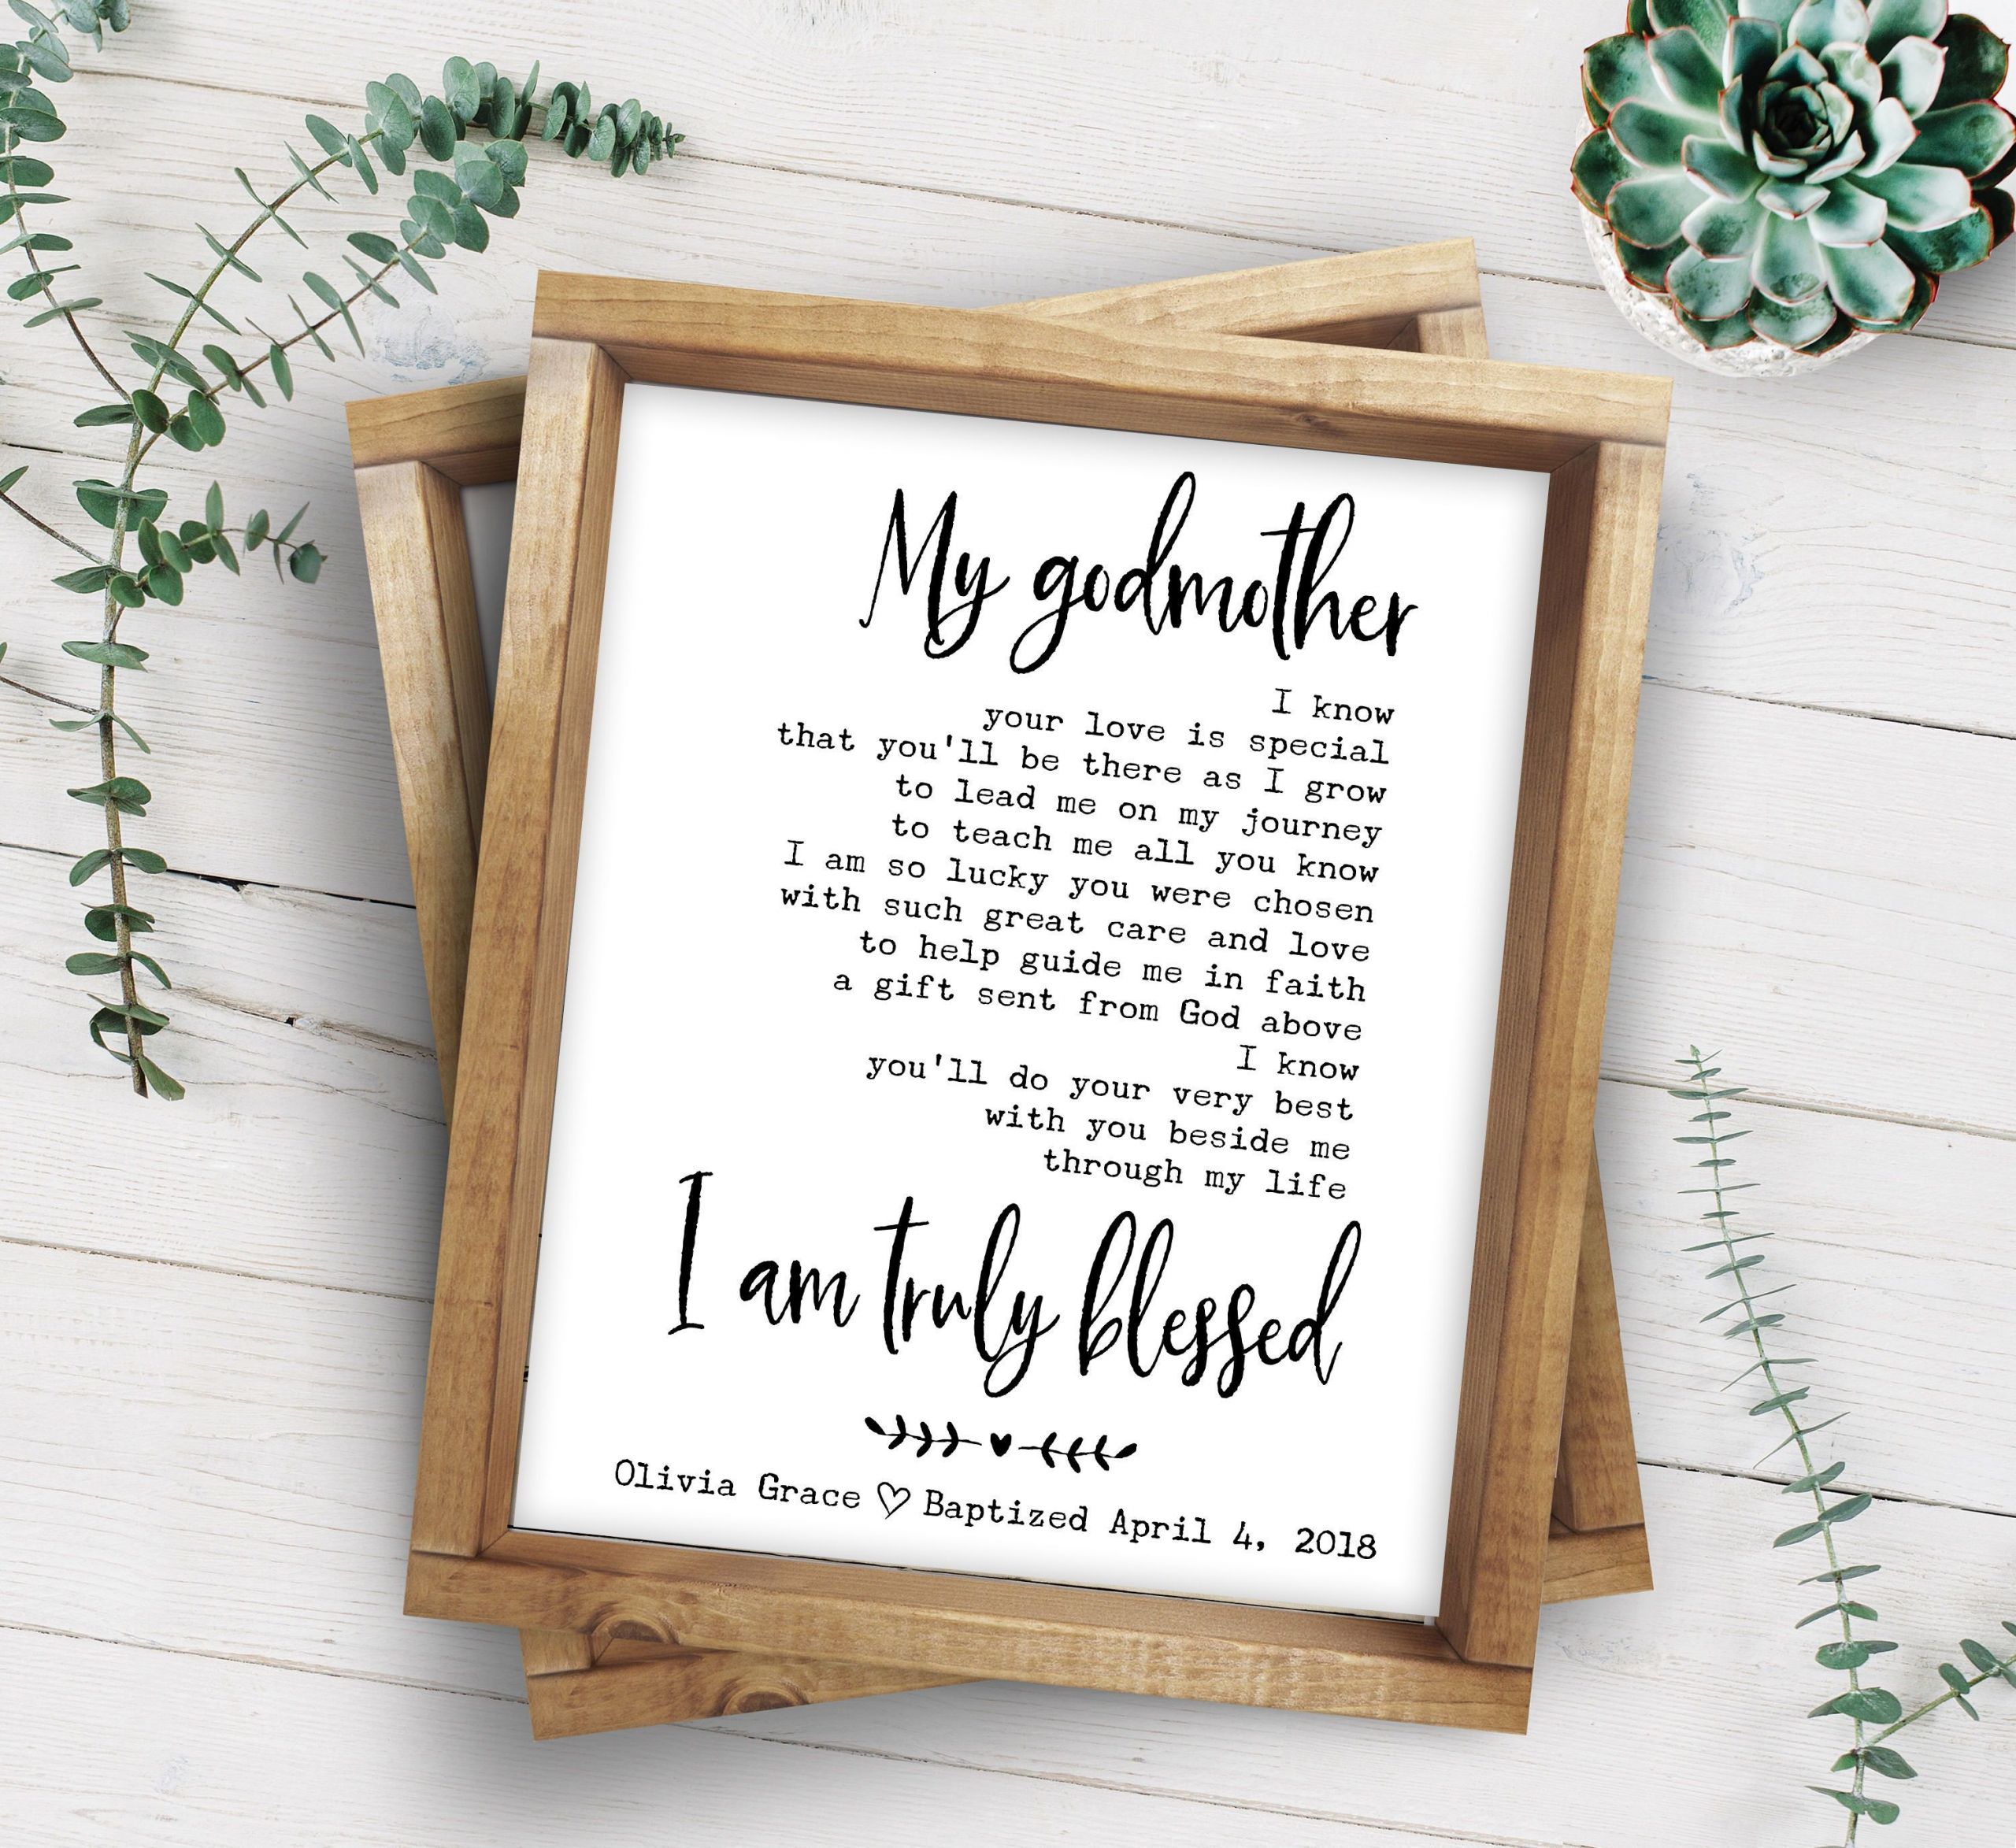 Godfather Gift Ideas For Christening
 Godmother Poem Godmother Christening Gift